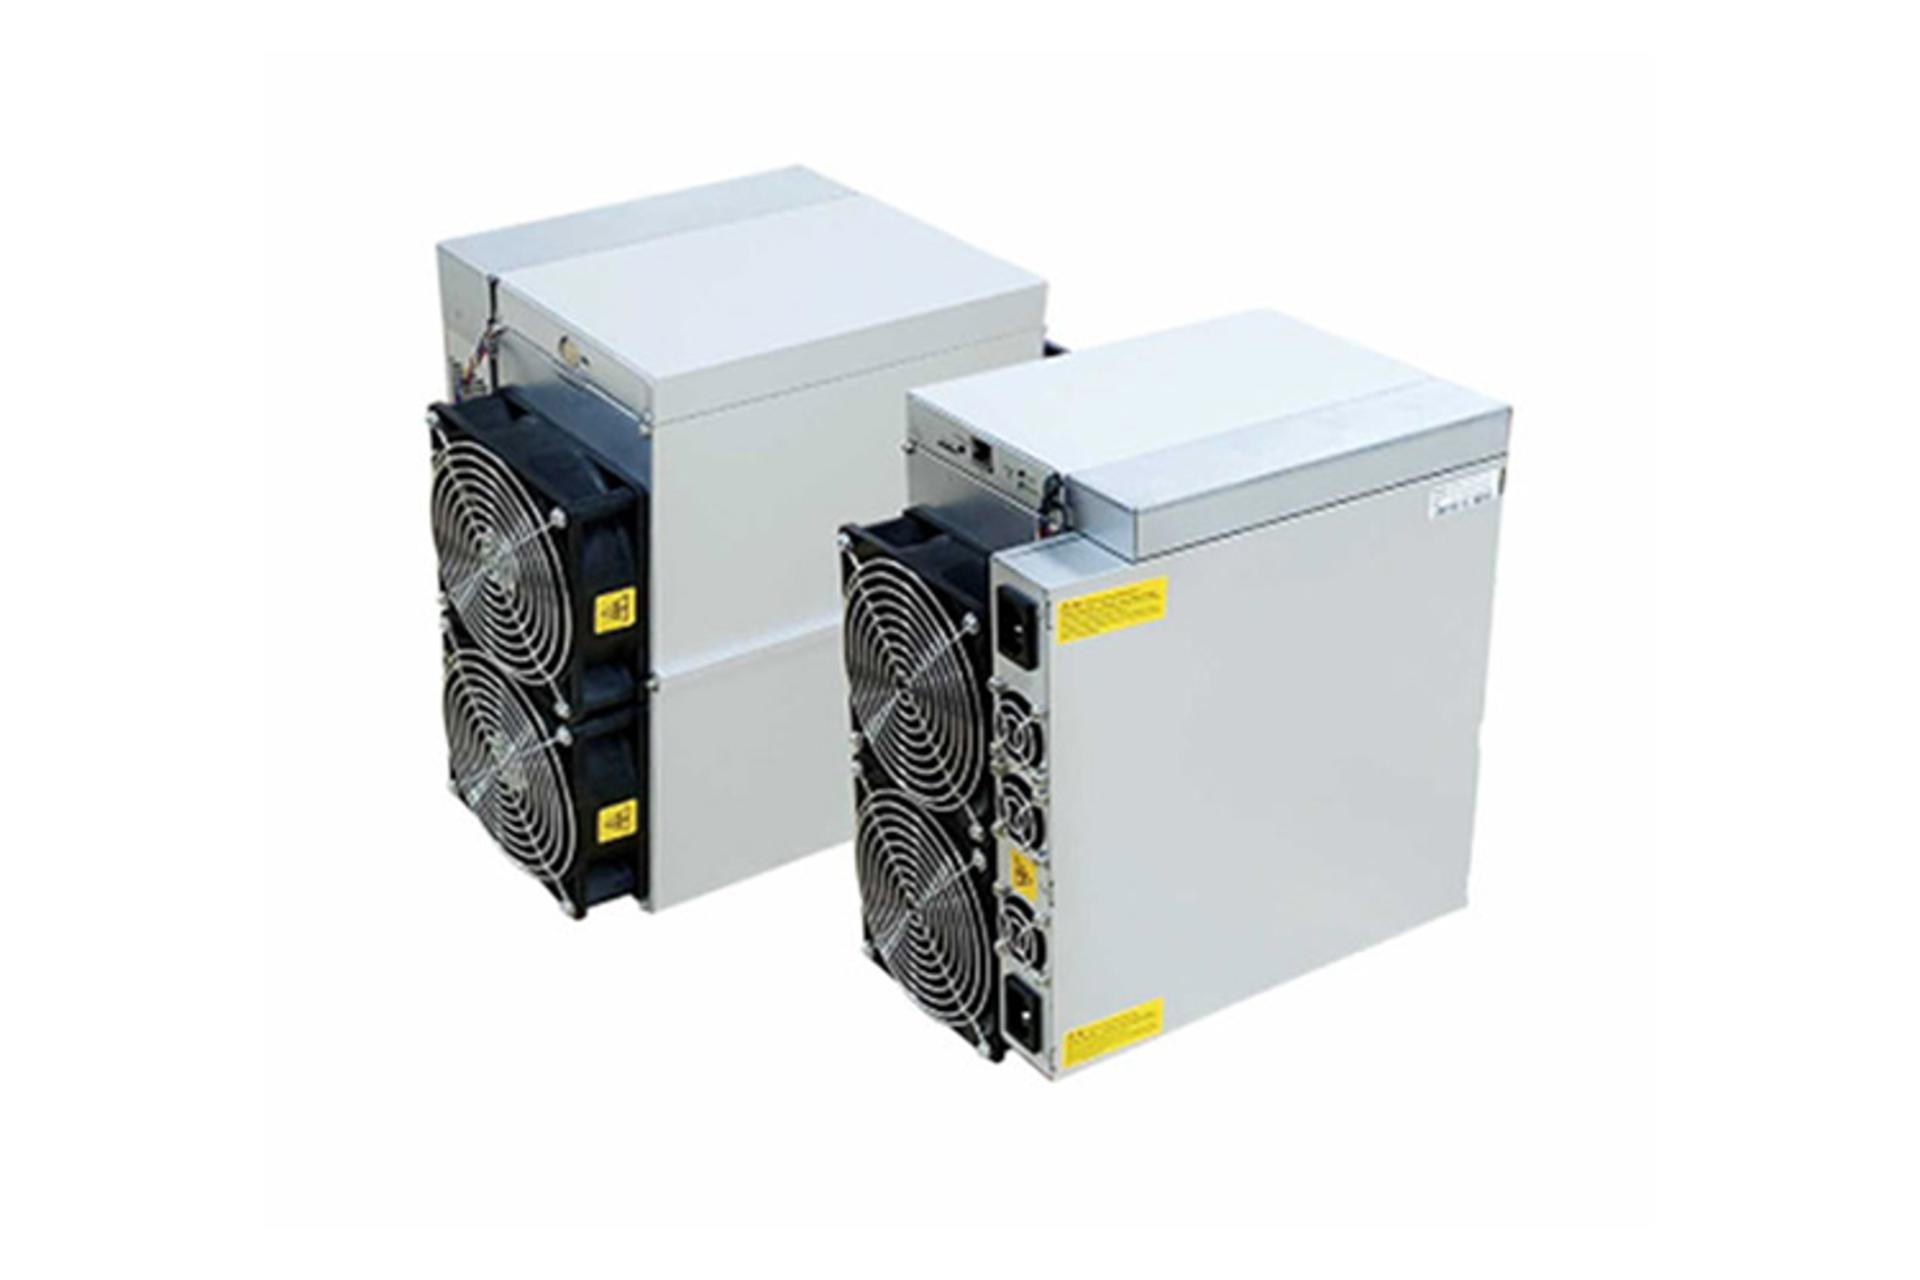 Bitmain Antminer T17+ / ماینر Bitmain Antminer T17+